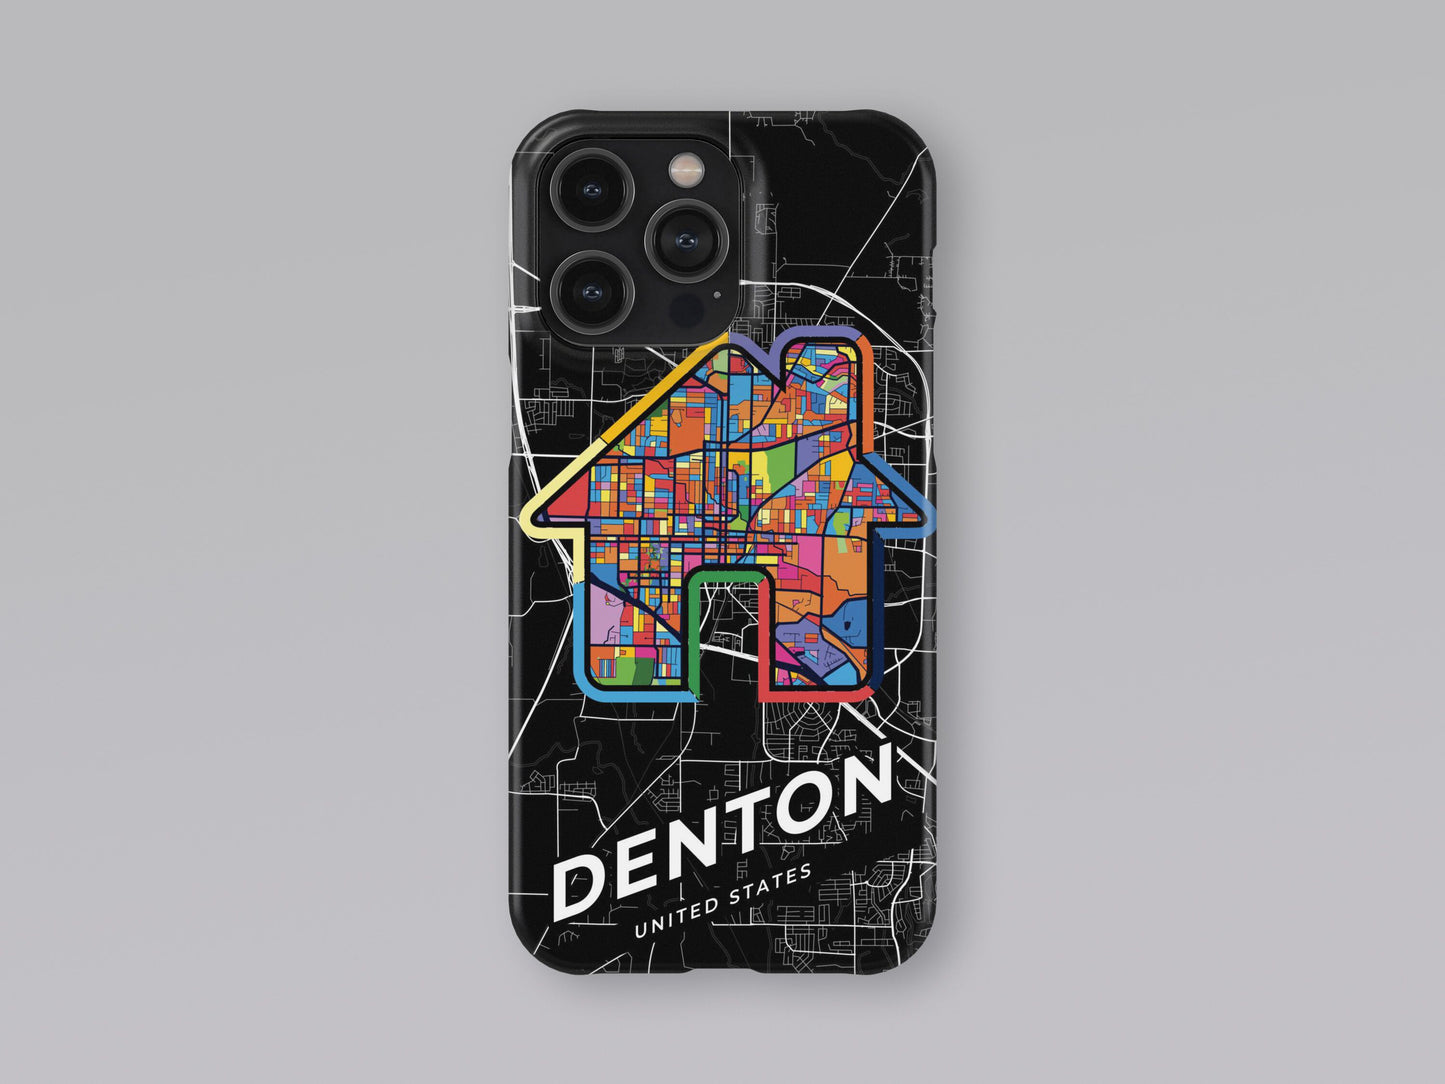 Denton Texas slim phone case with colorful icon. Birthday, wedding or housewarming gift. Couple match cases. 3